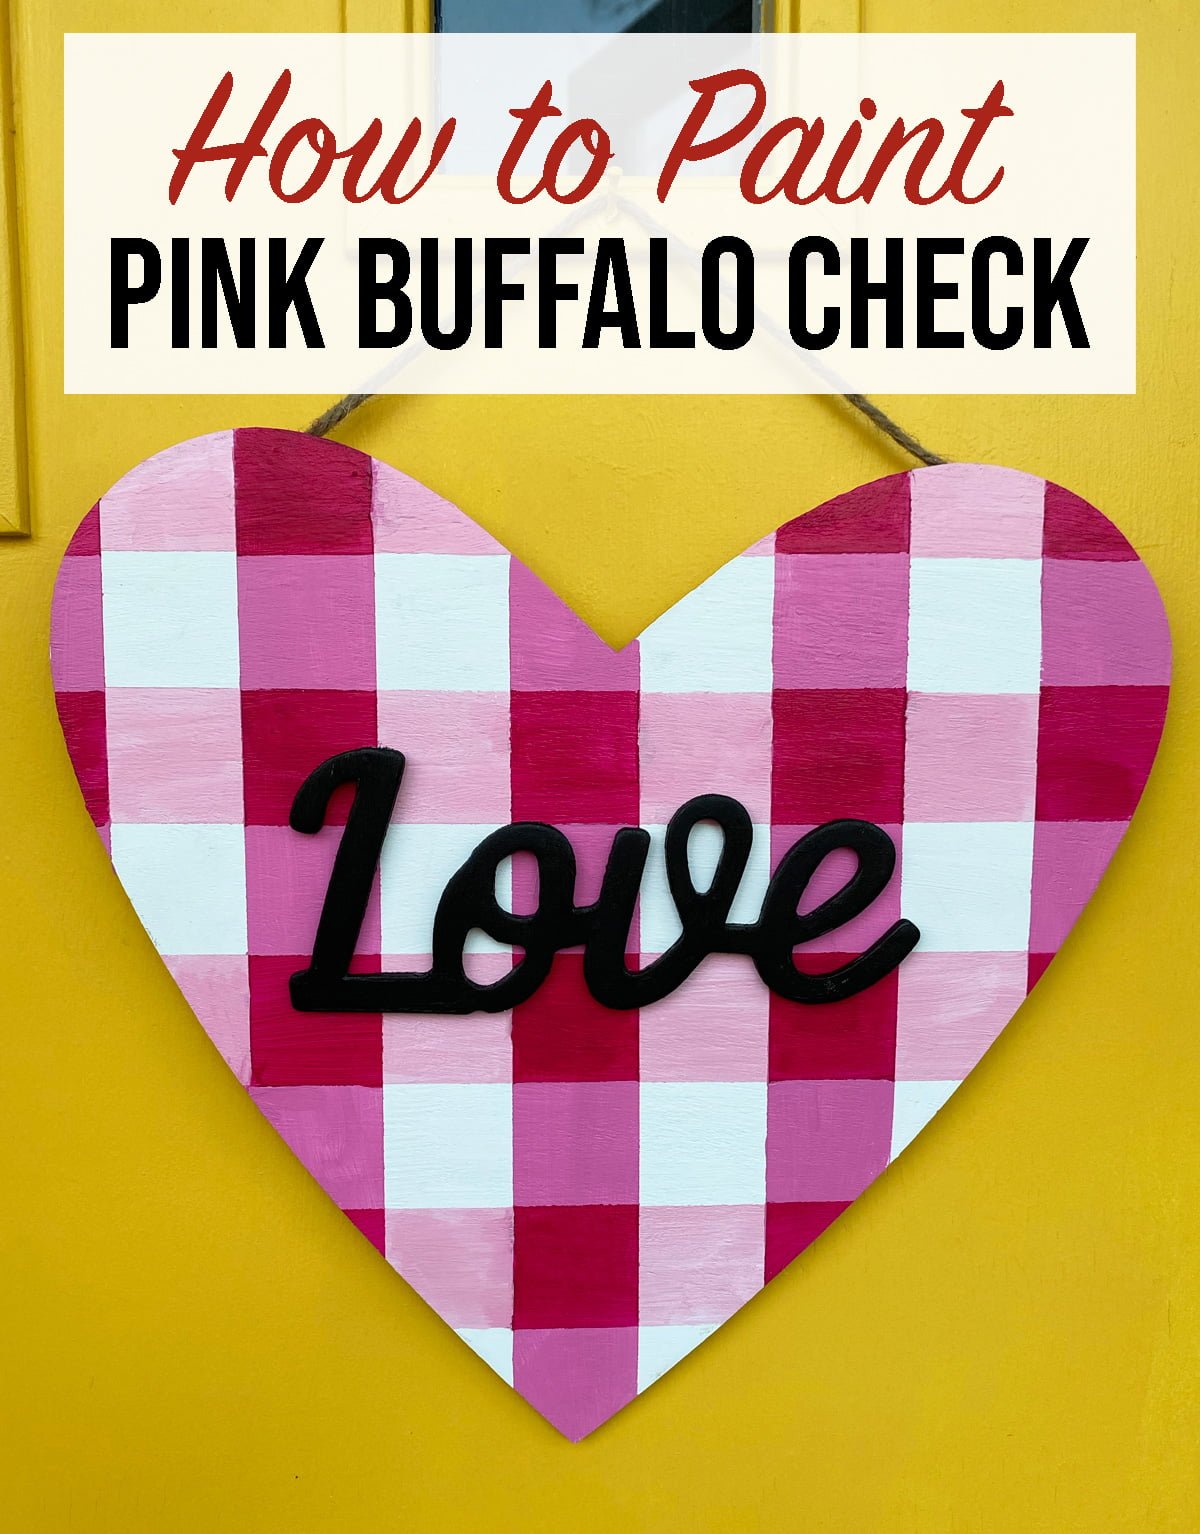 How to Paint Pink Buffalo Check Plaid